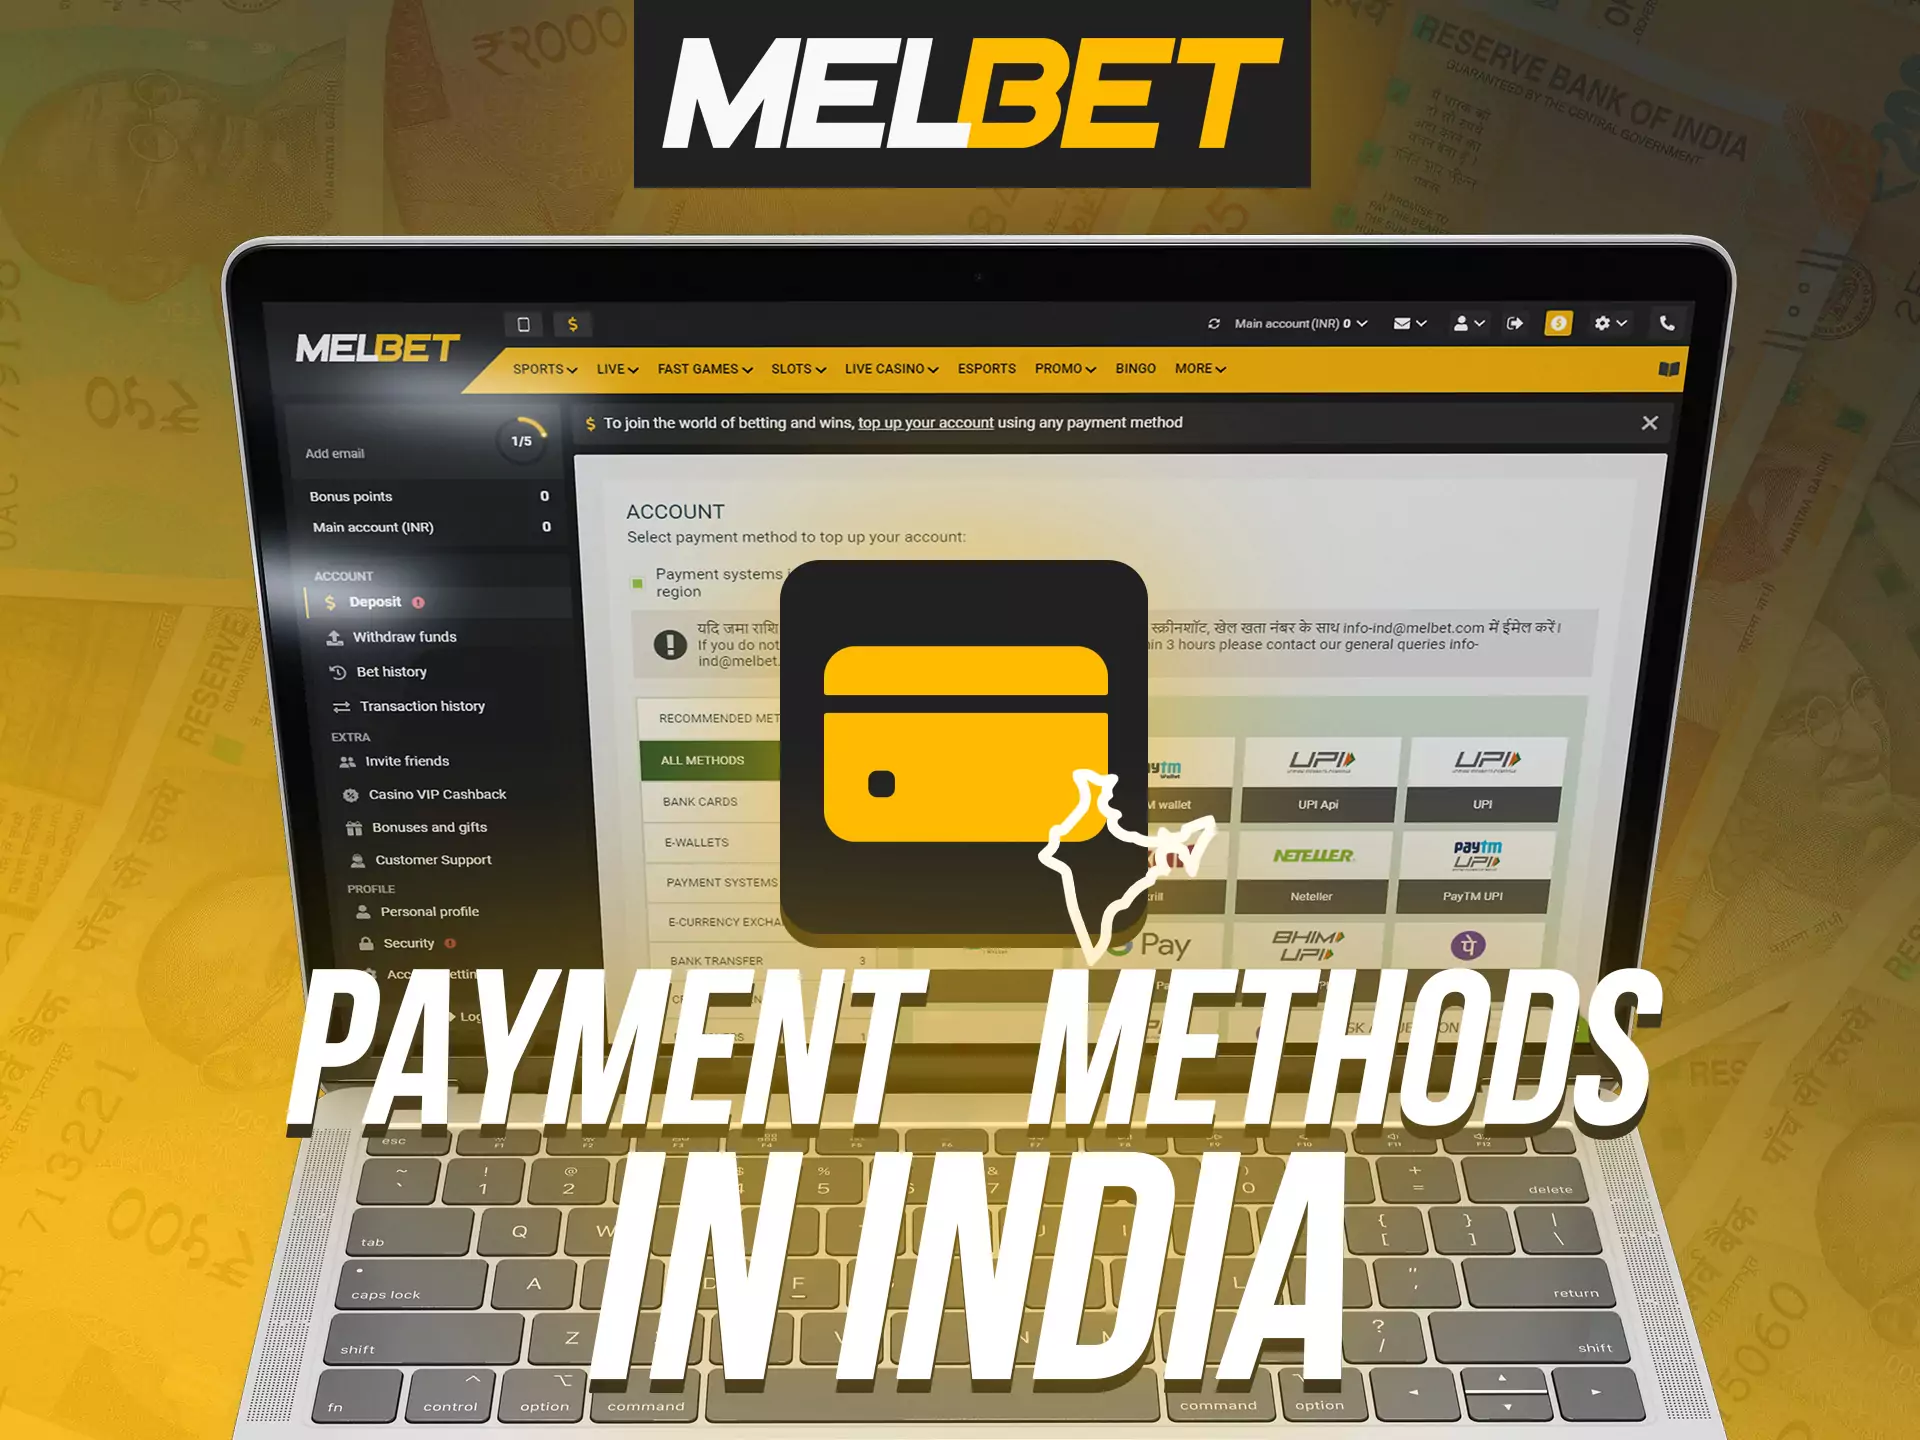 Select your prefered payment method and make deposit at Melbet.